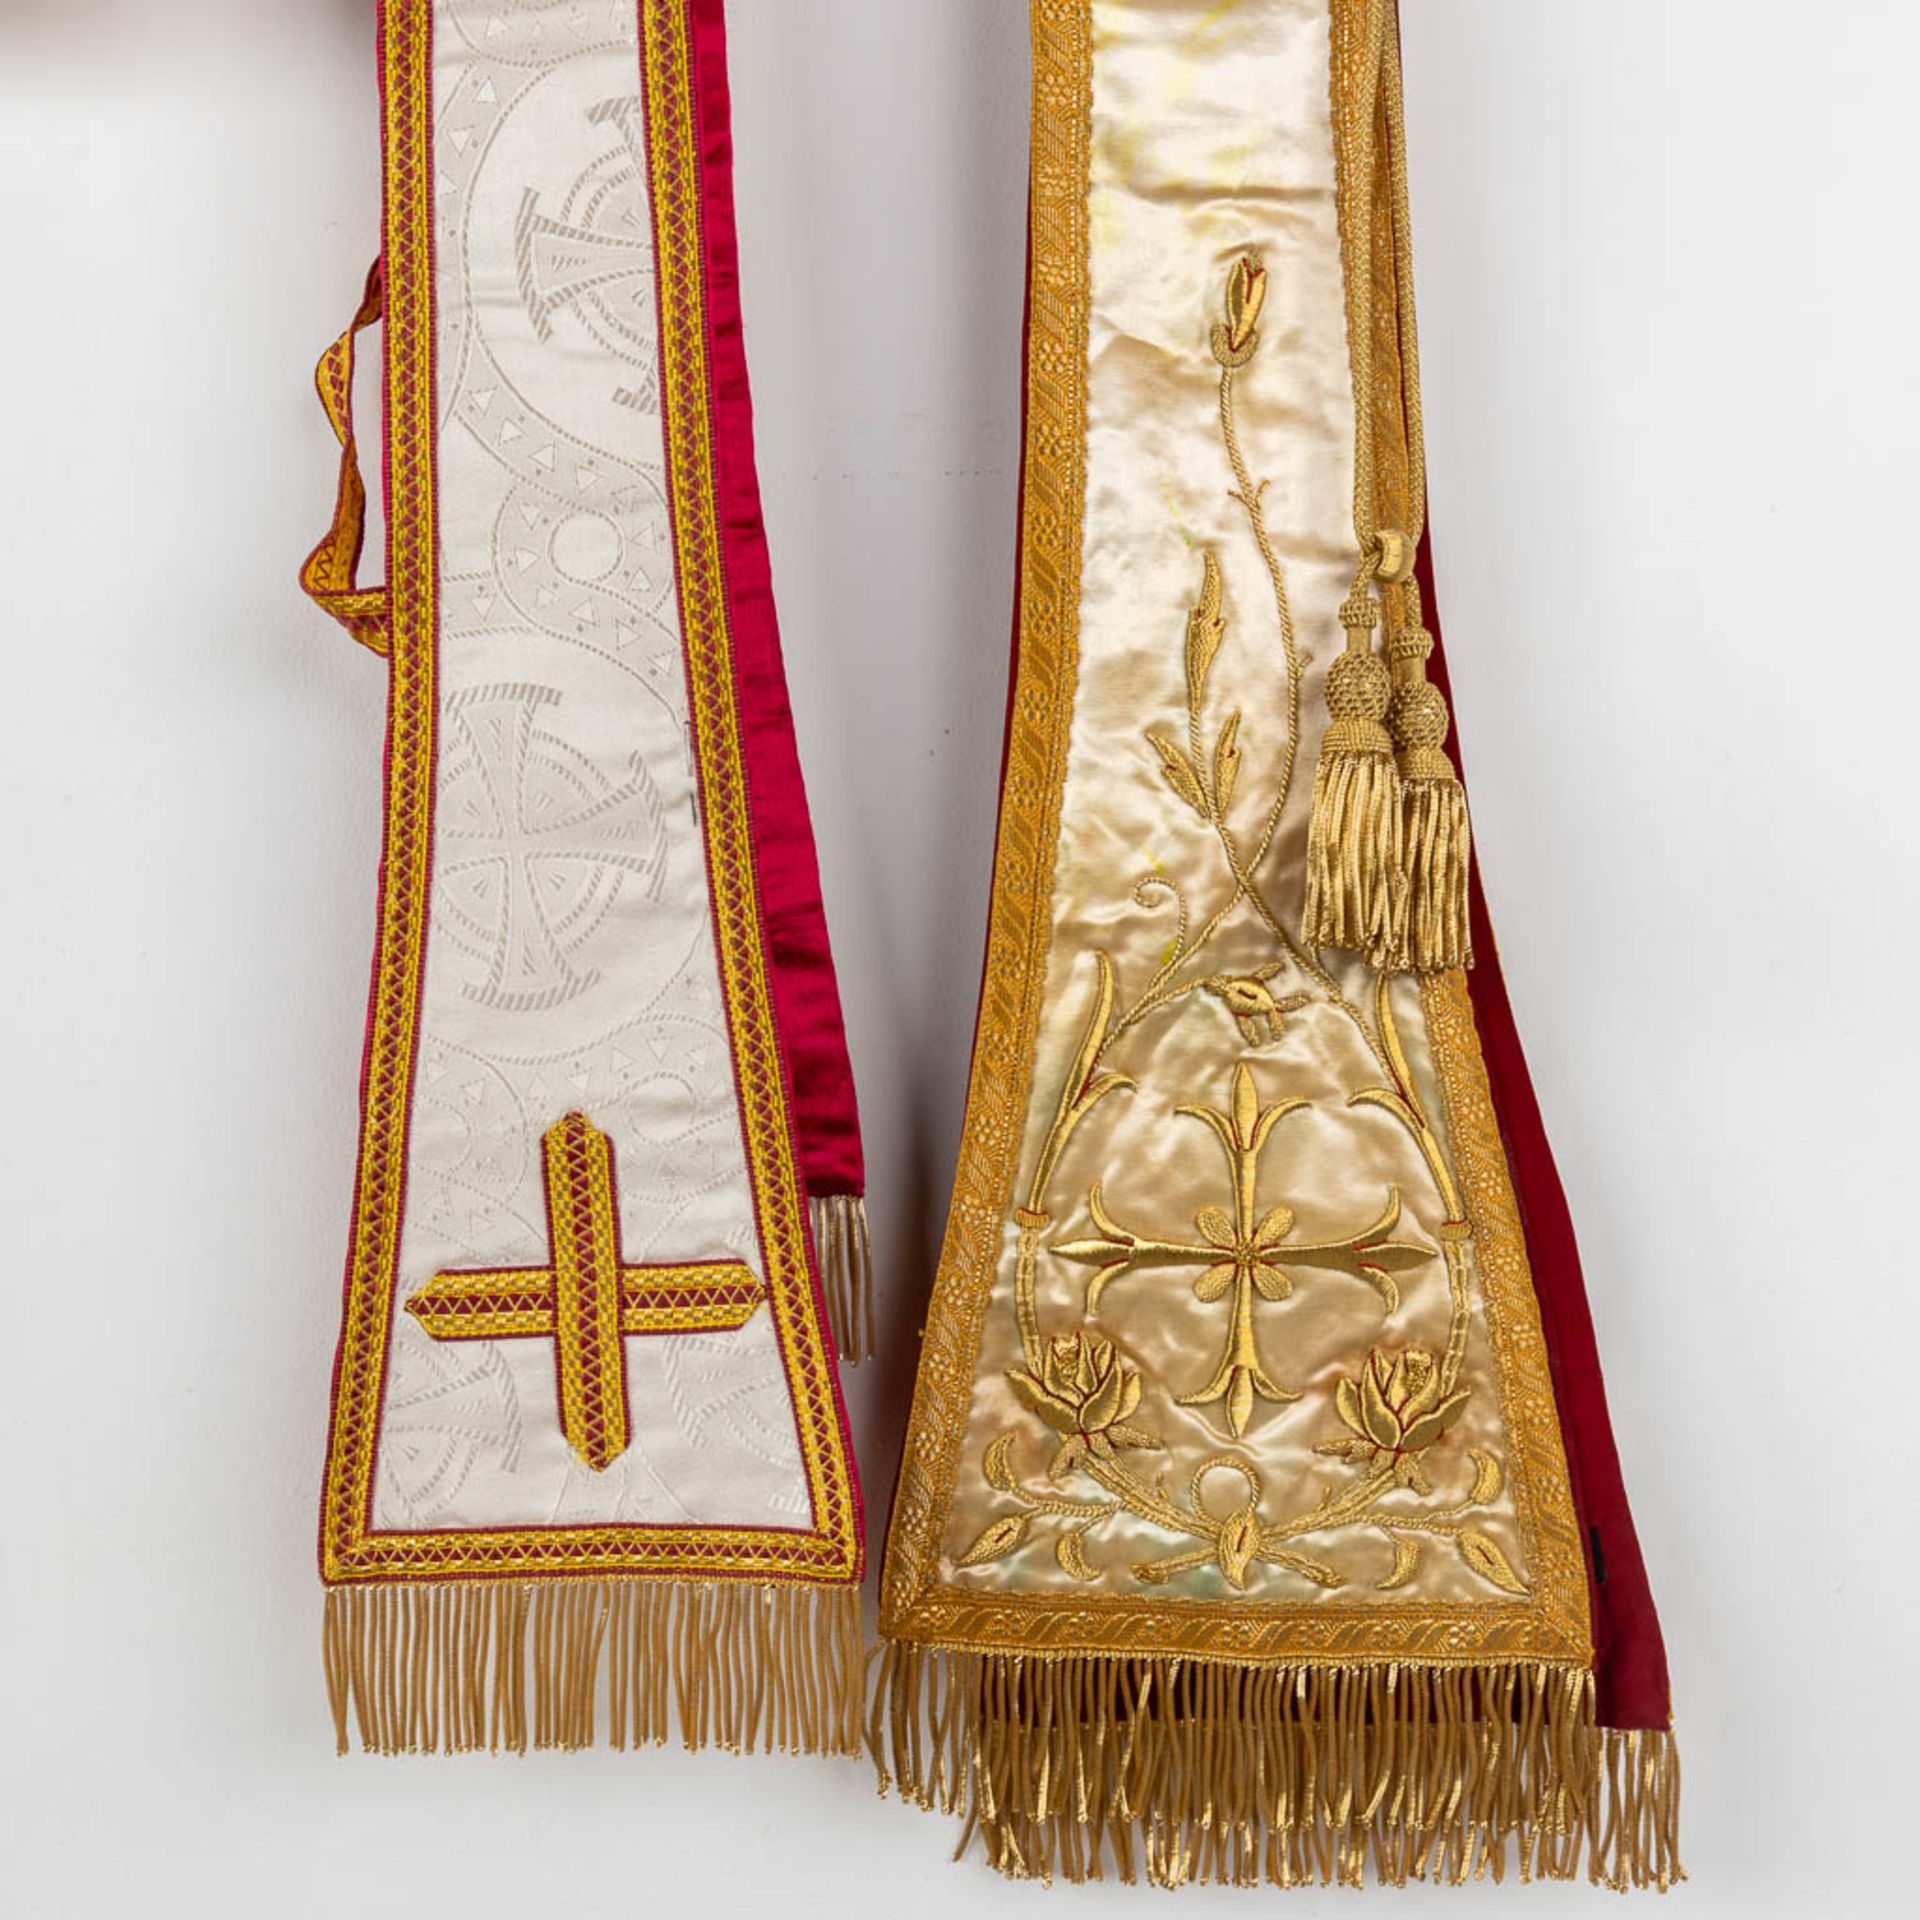 A matching set of Liturgical robes, 4 dalmatics, maniples and stola. - Image 17 of 17